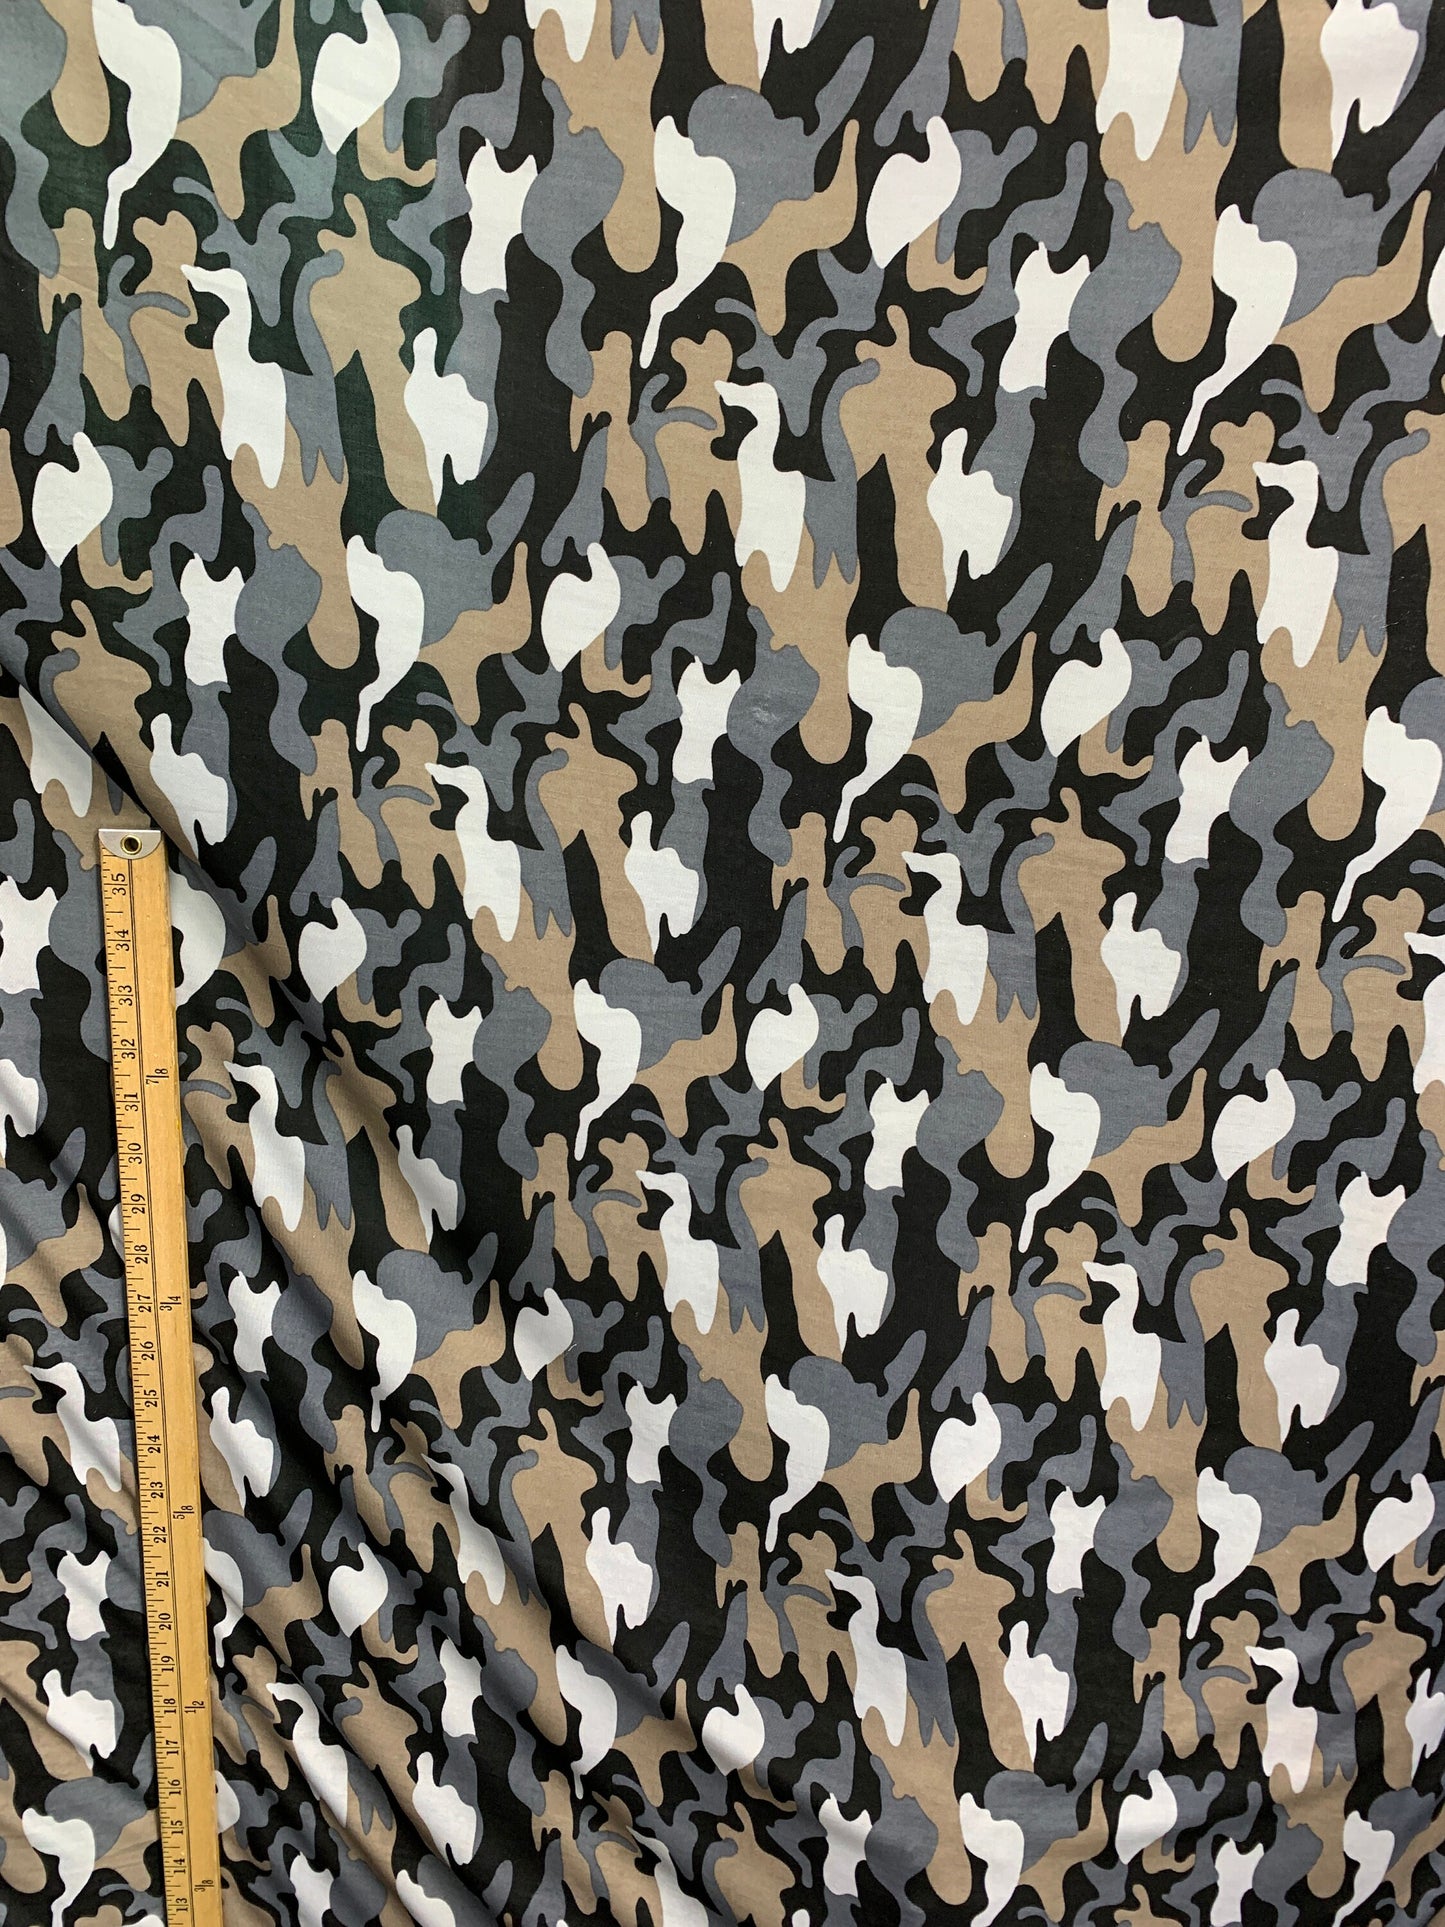 BEIGE GRAY Camouflage Print Cotton Jersey Stretch Fabric (60 in.) Sold By The Yard